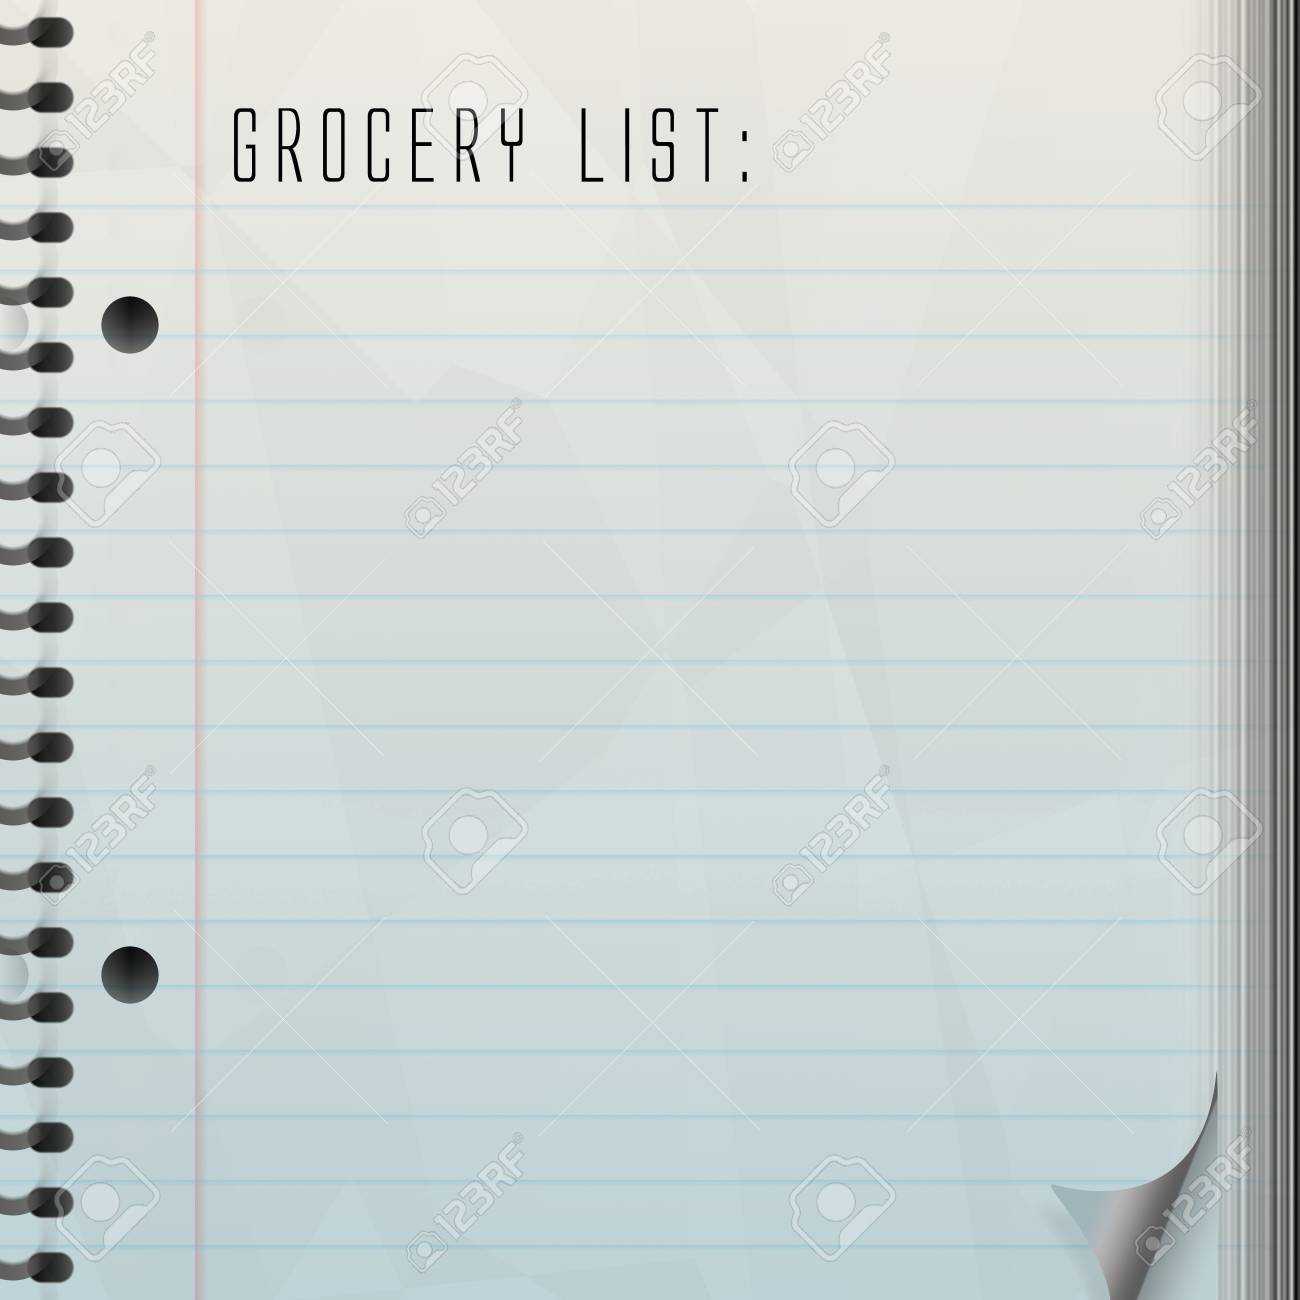 A Blank Grocery List With A Page Curl. Intended For Blank Grocery Shopping List Template